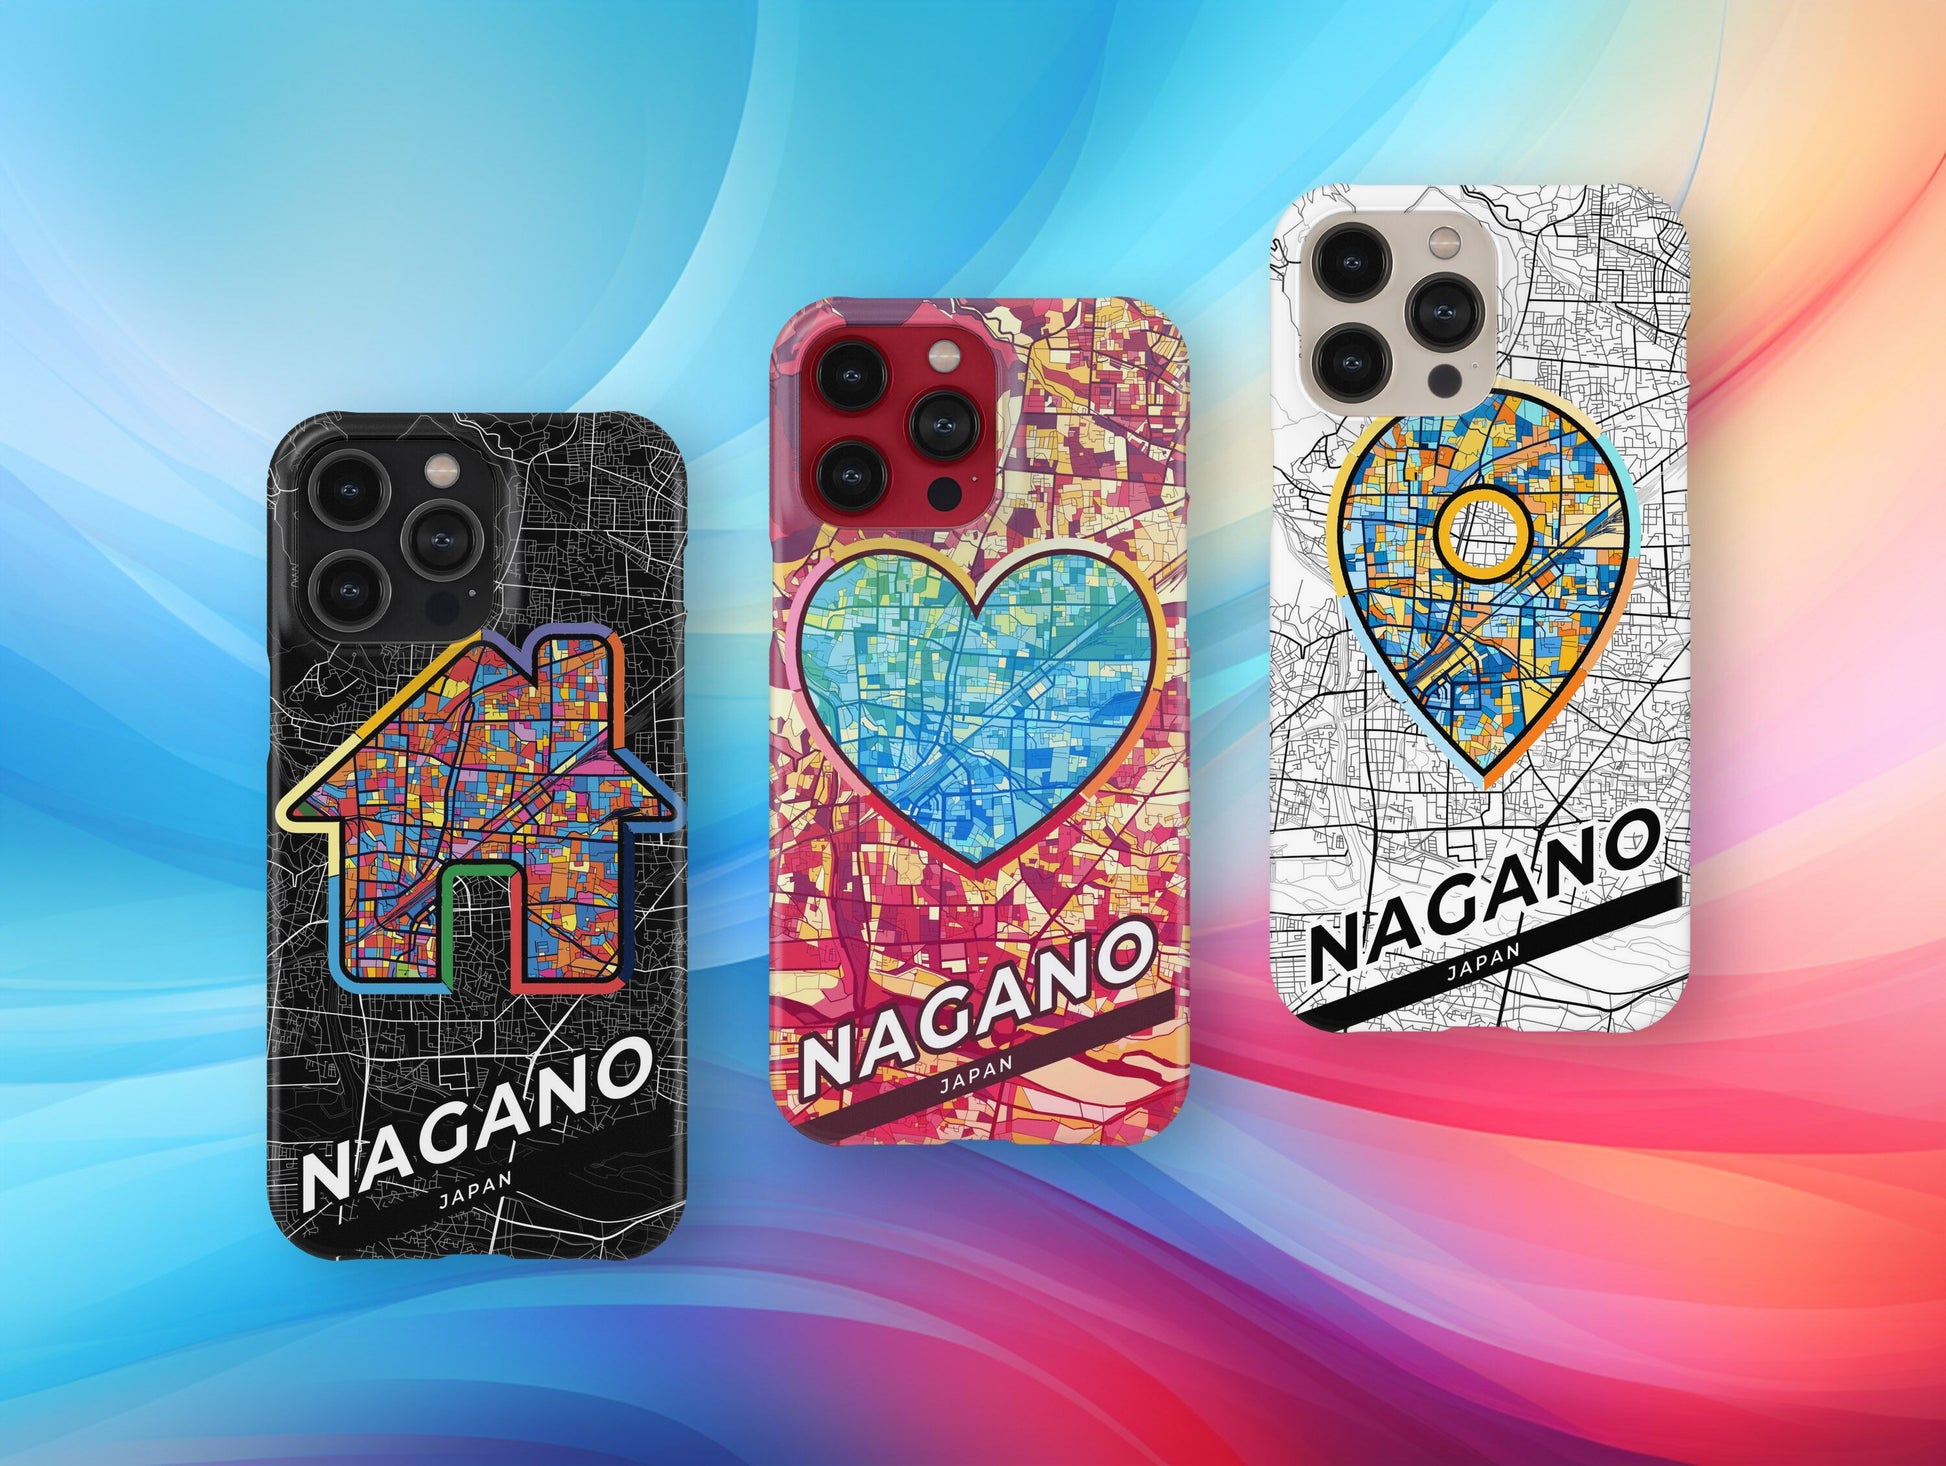 Nagano Japan slim phone case with colorful icon